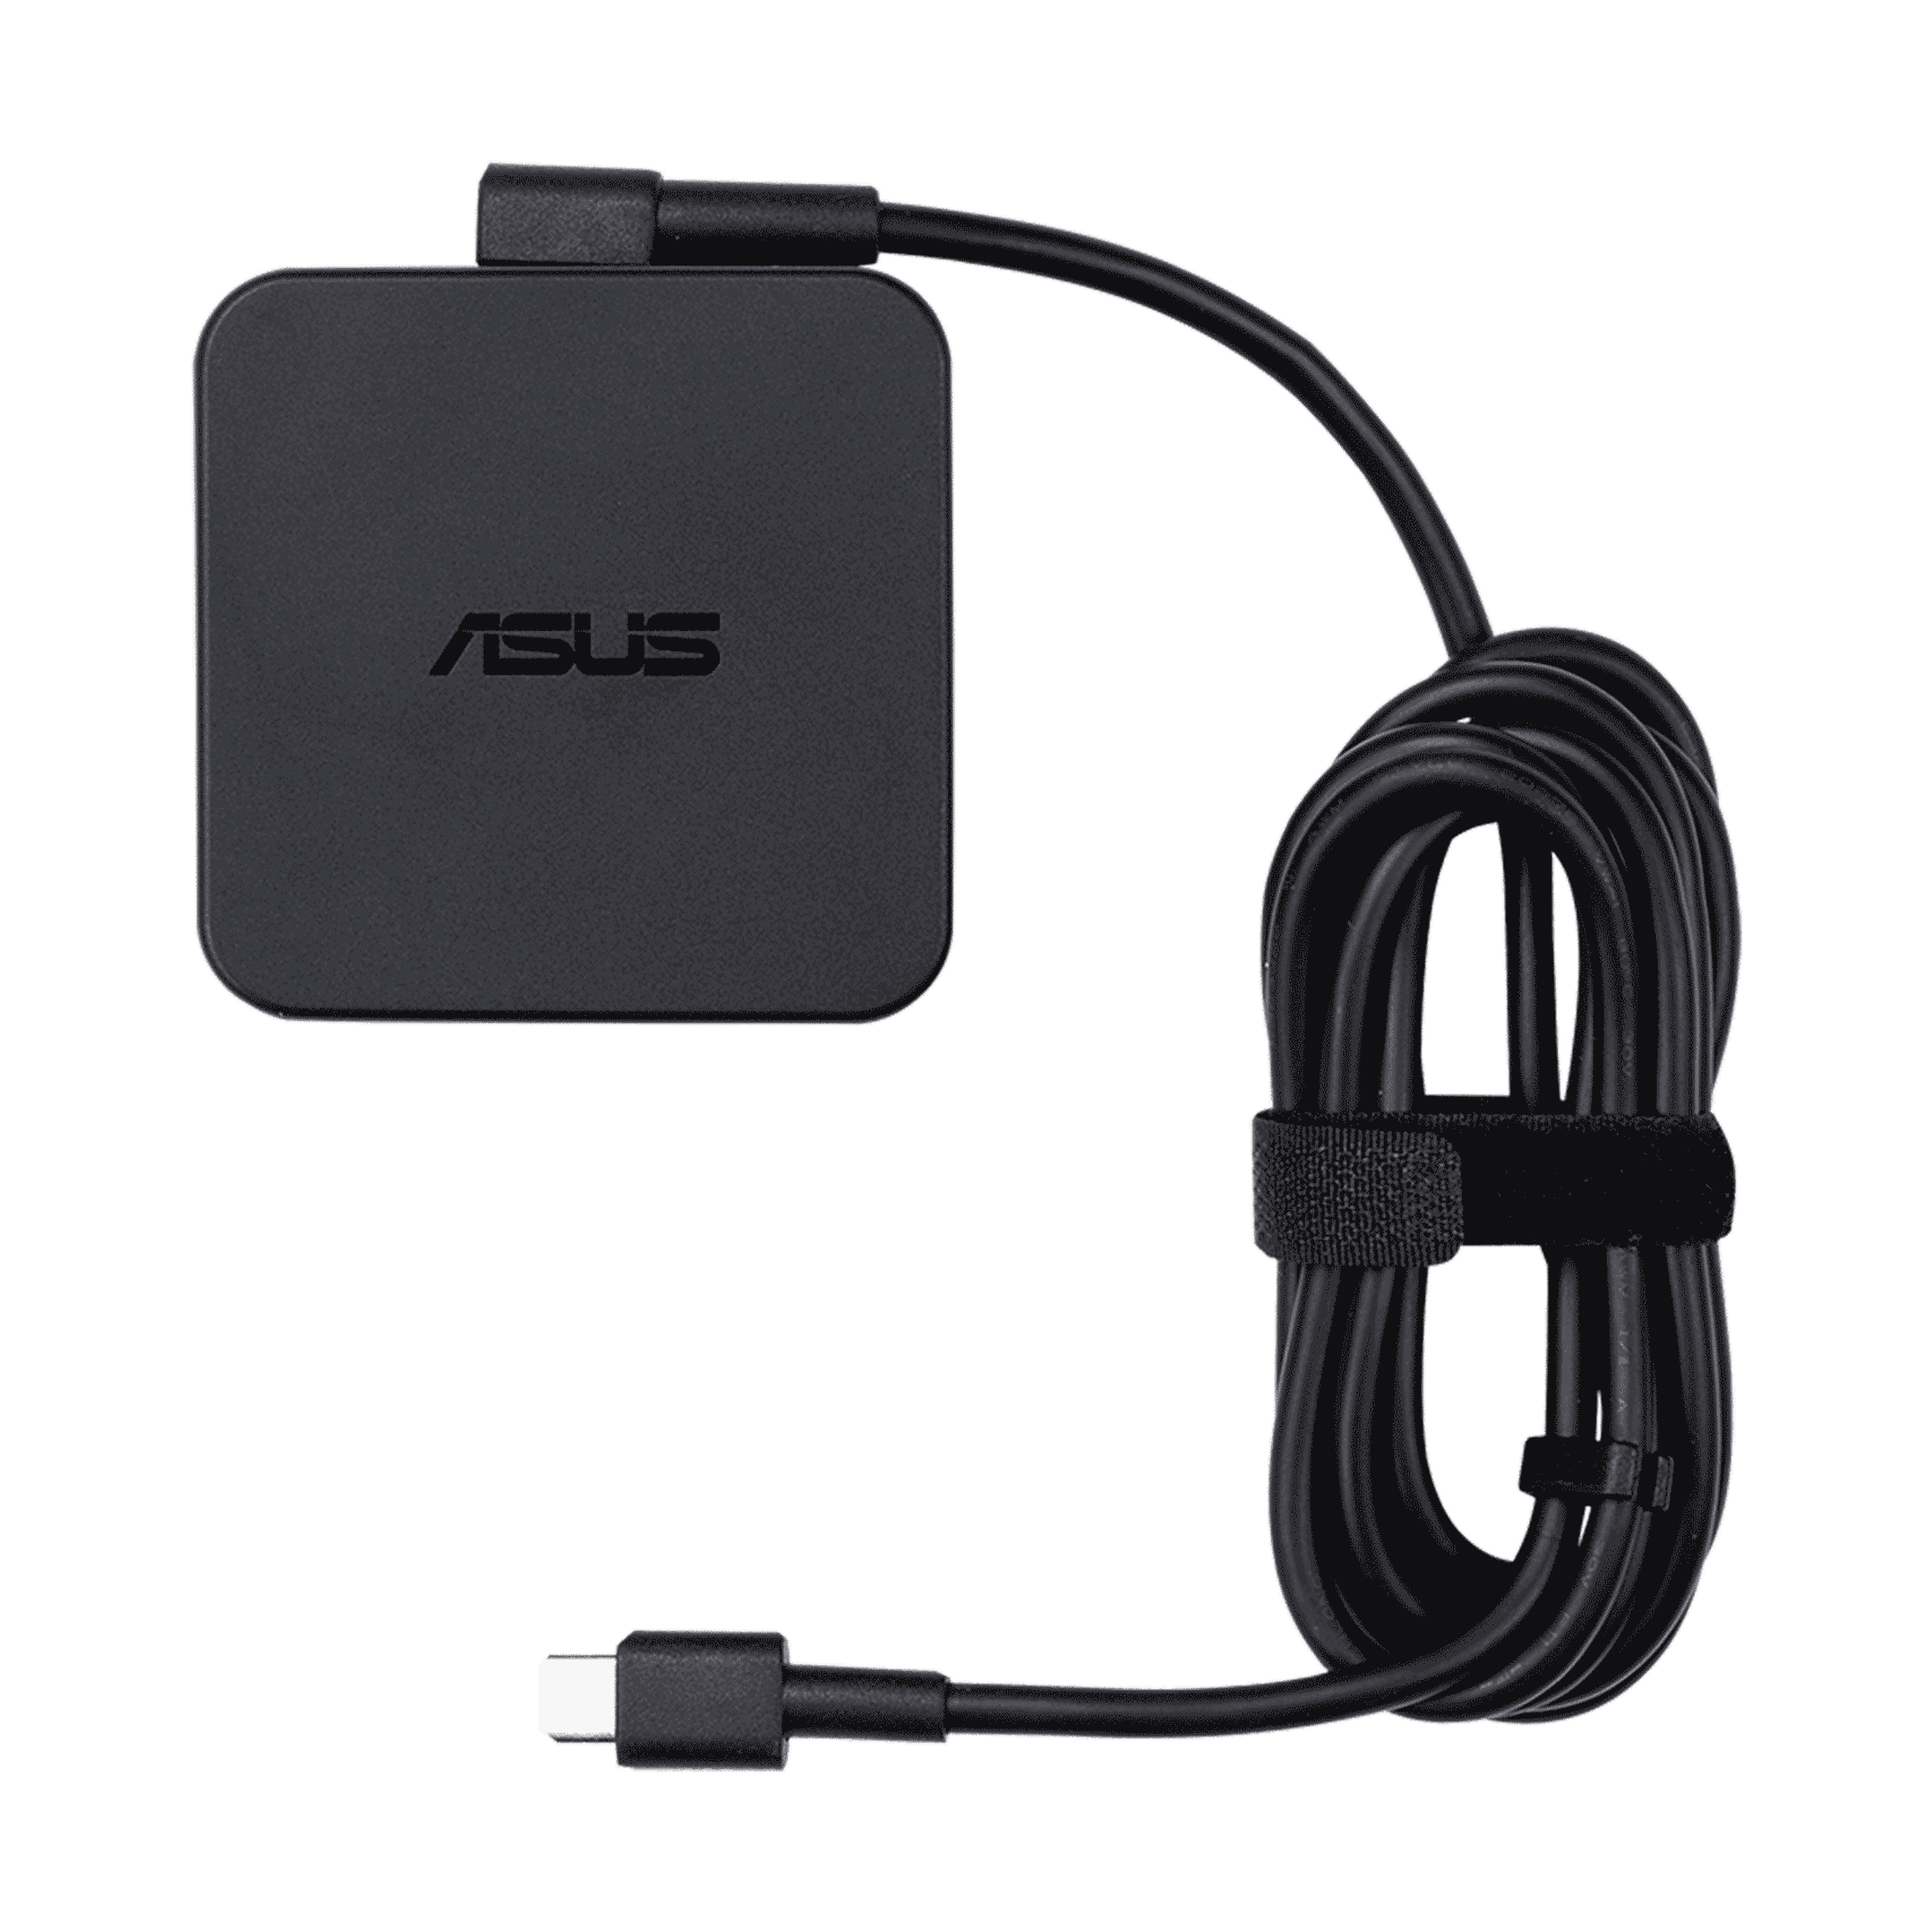 Klem Overgang Tot stand brengen ASUS AC65-00 65W USB Type-C Adapter｜Adapters and Chargers｜ASUS Global